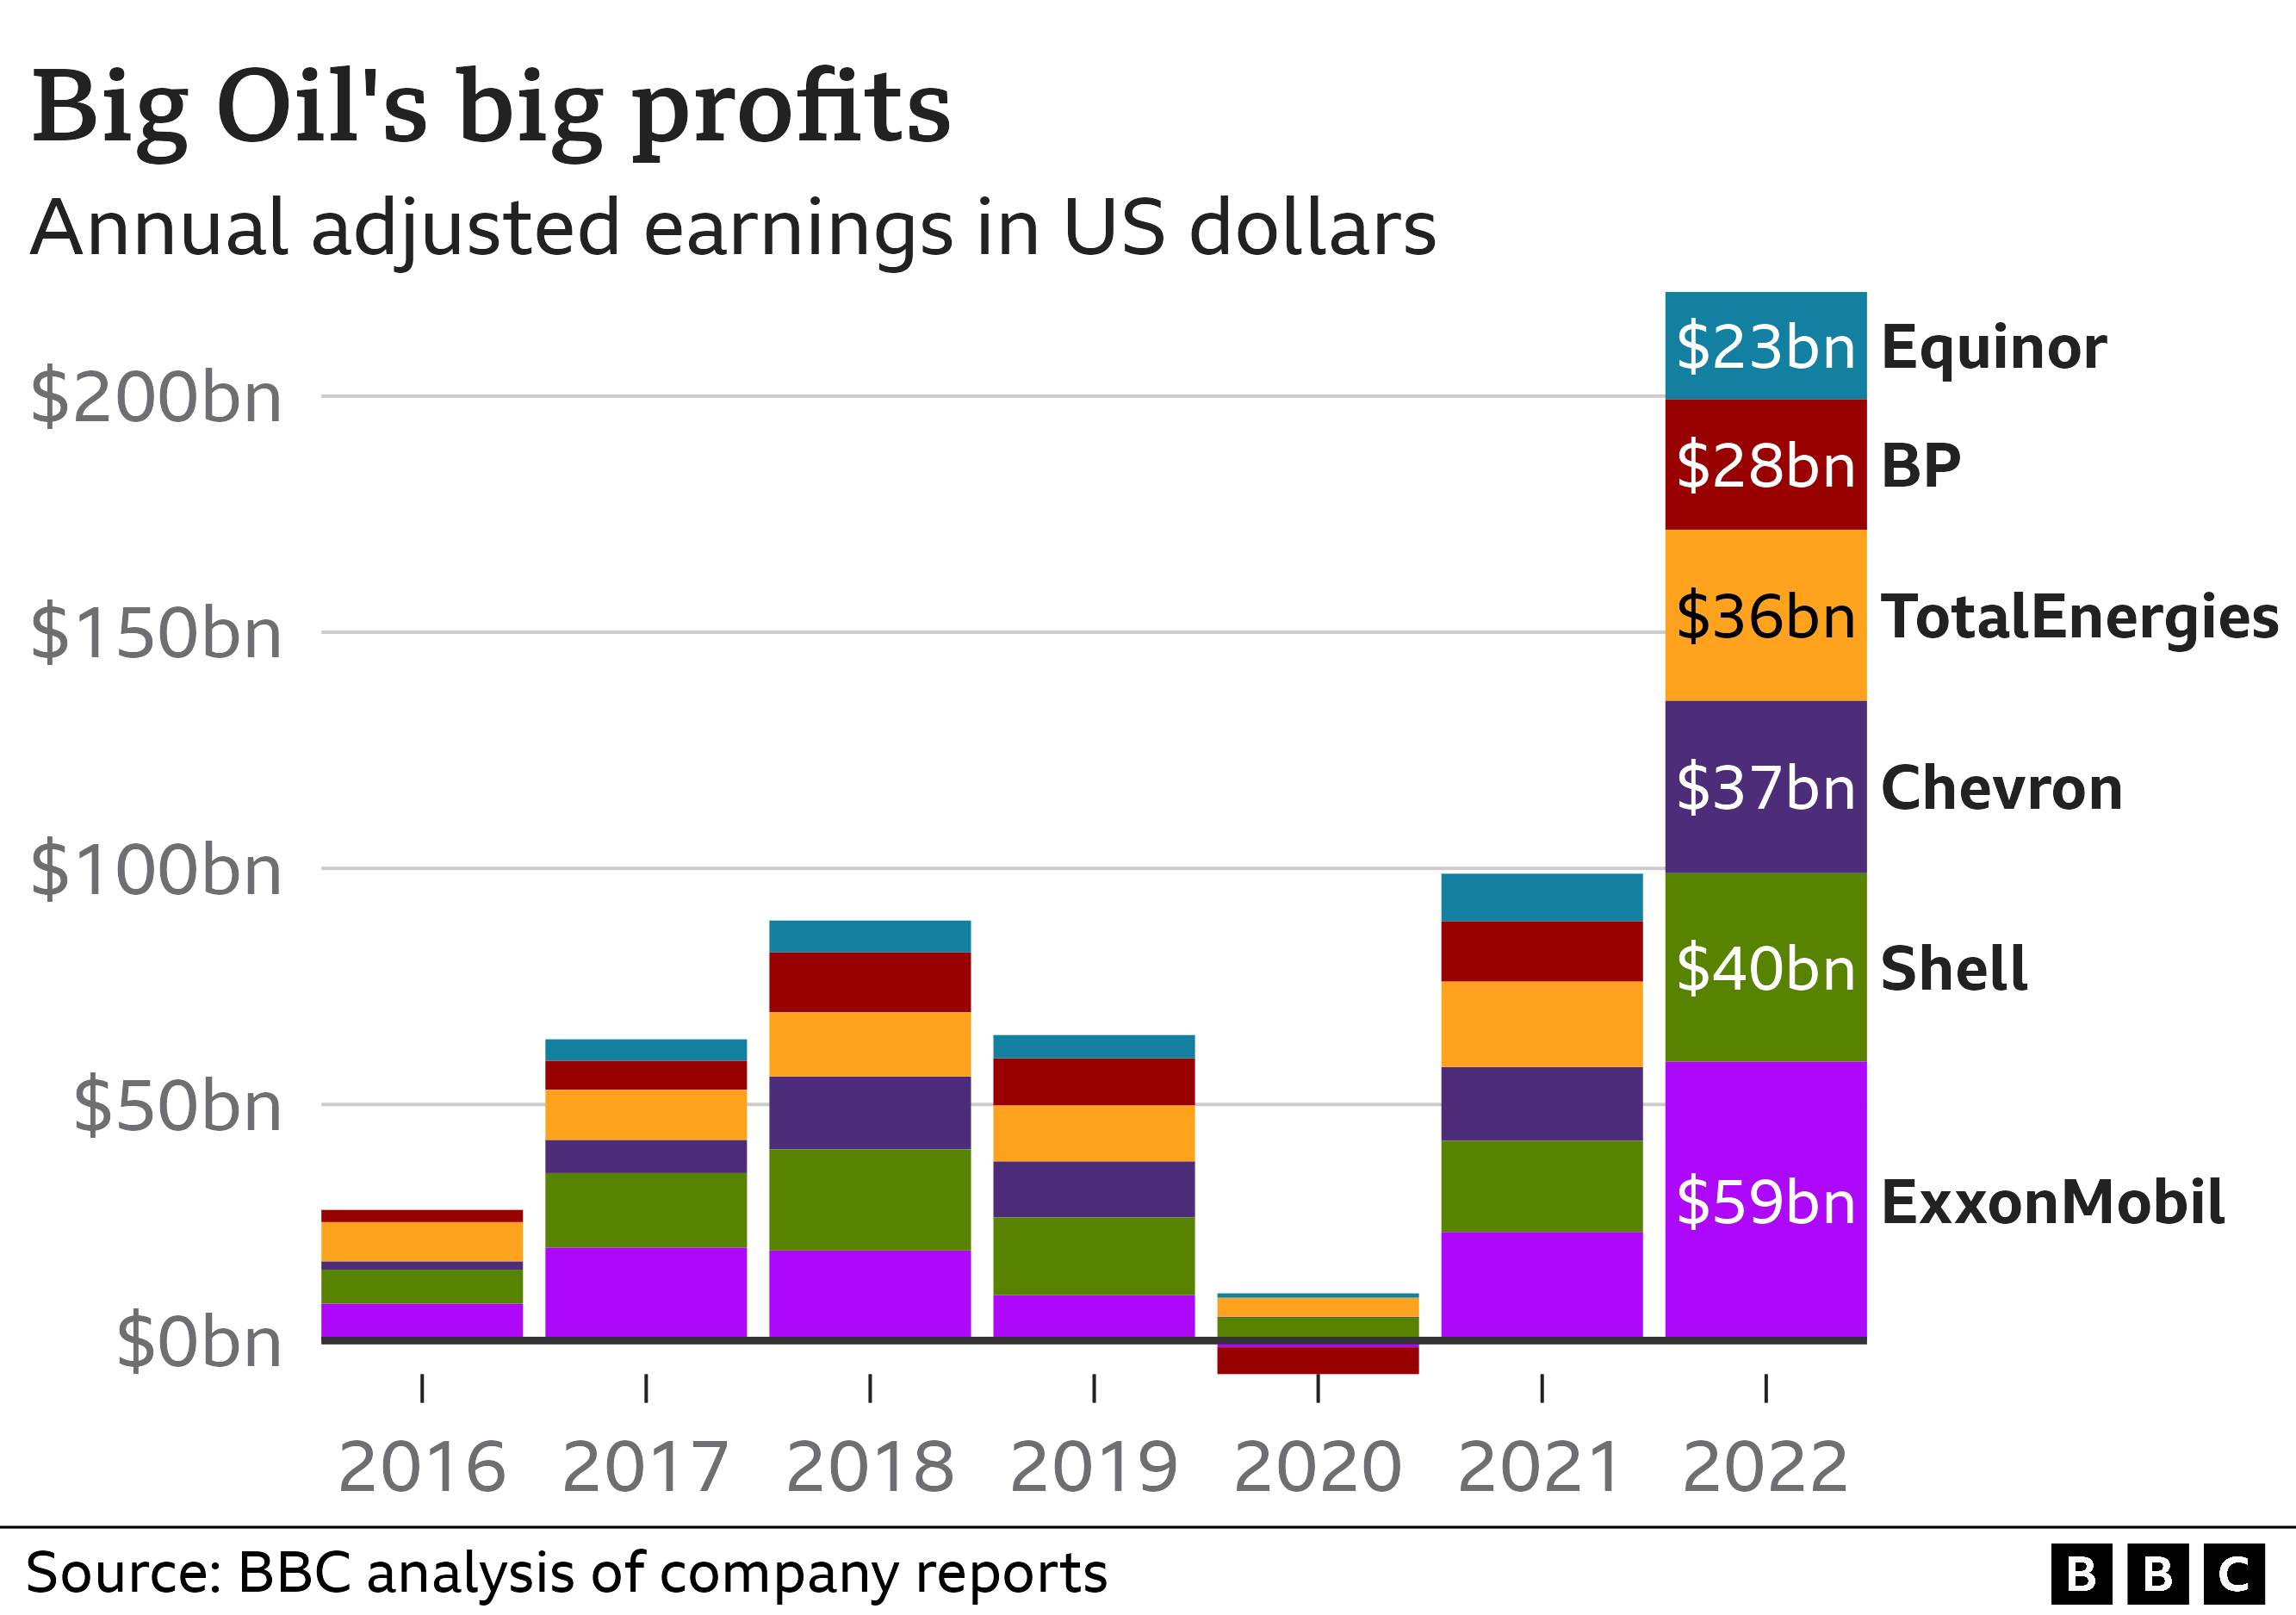 Bar chart showing combined earnings of Big Oil companies.  In 2022, they will reach $222bn, more than double the previous year.